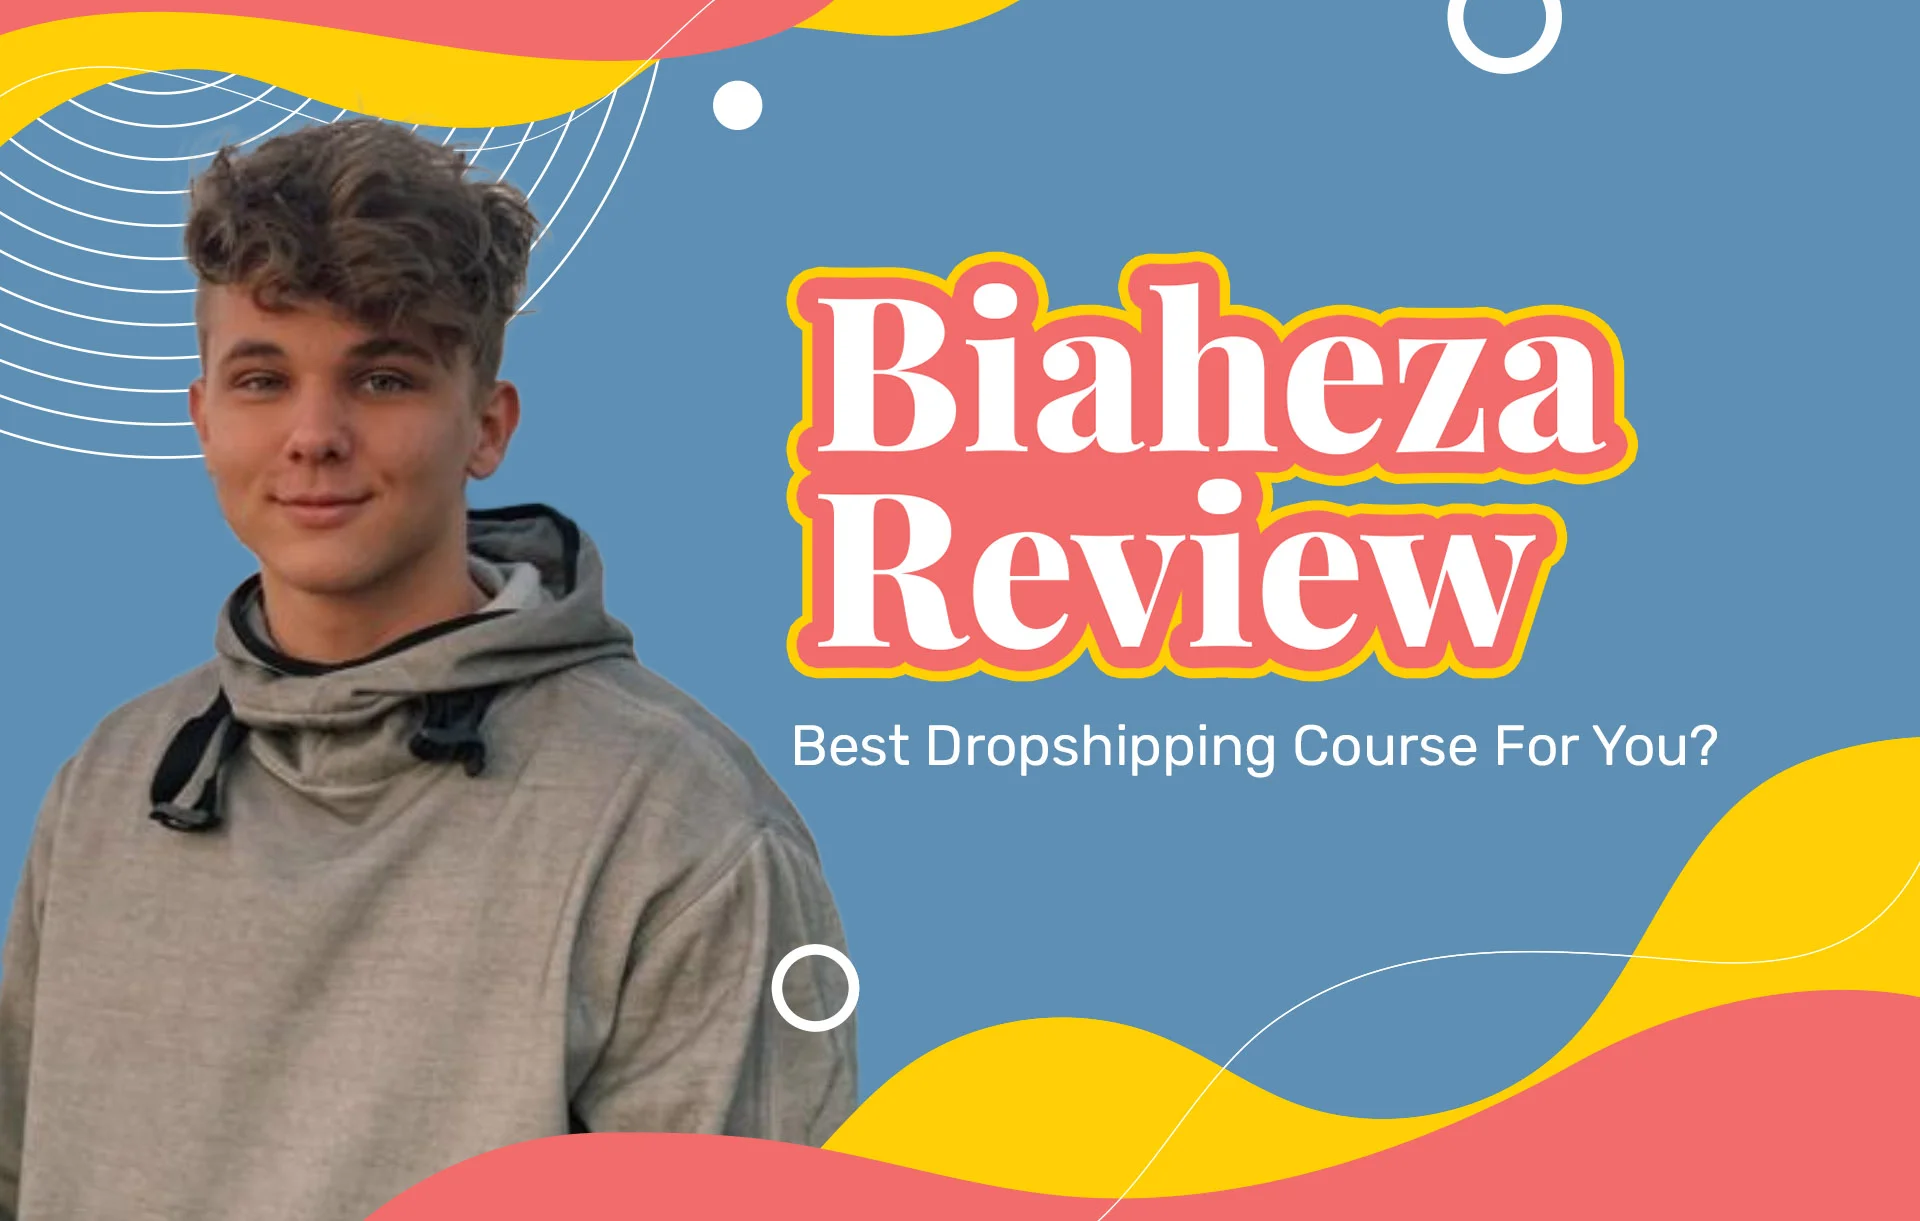 Biaheza Review: Best Dropshipping Course?